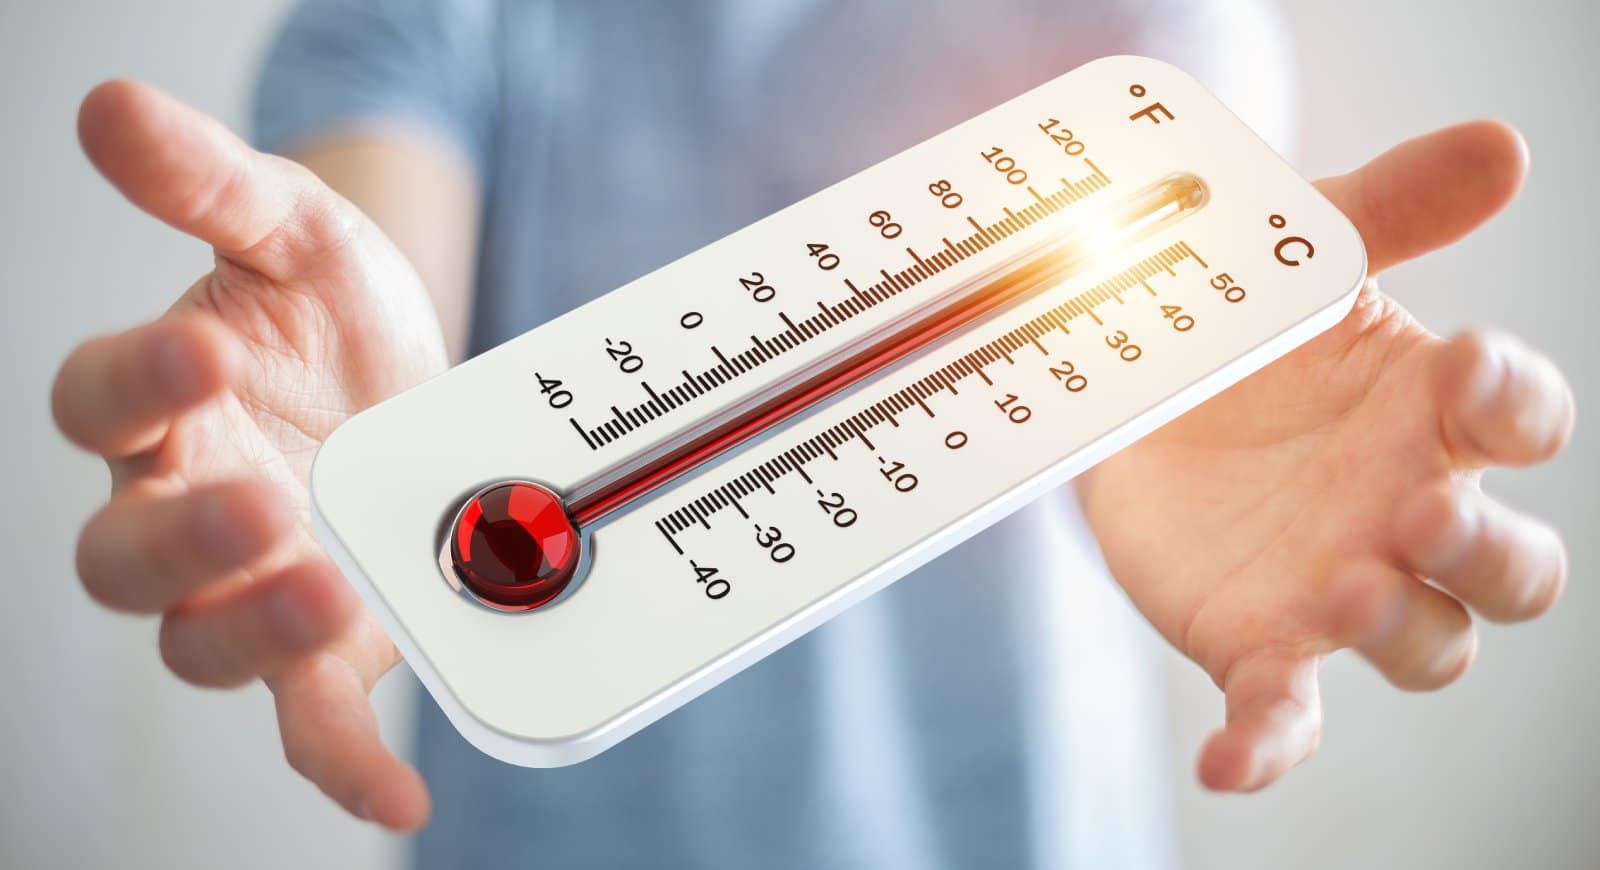 <p class="wp-caption-text">Image Credit: Shutterstock / sdecoret</p>  <p>When someone asks how tall you are or discusses the weather, being able to switch to centimeters and Celsius will save you from immediate identification.</p>